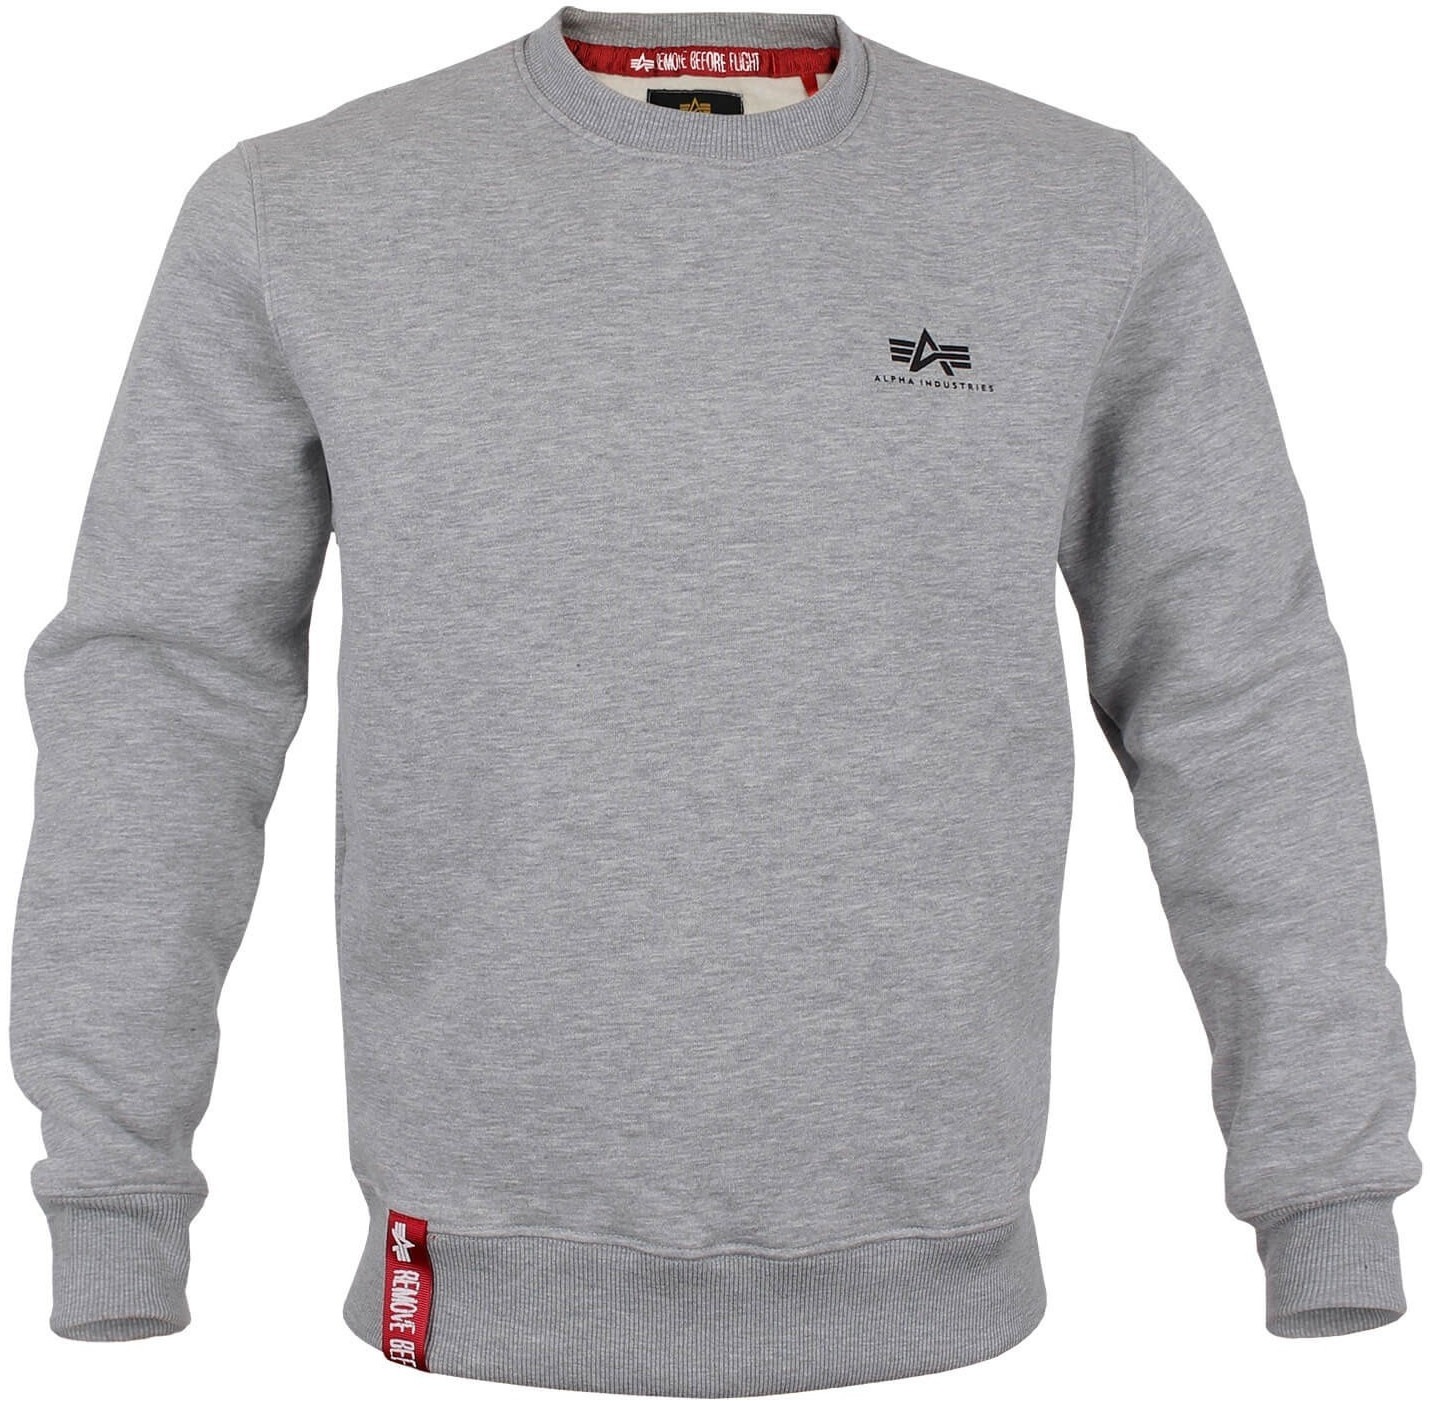 515 Grey The Logo Alpha Industries - Heather Basic - Sweater Small (188307/17)